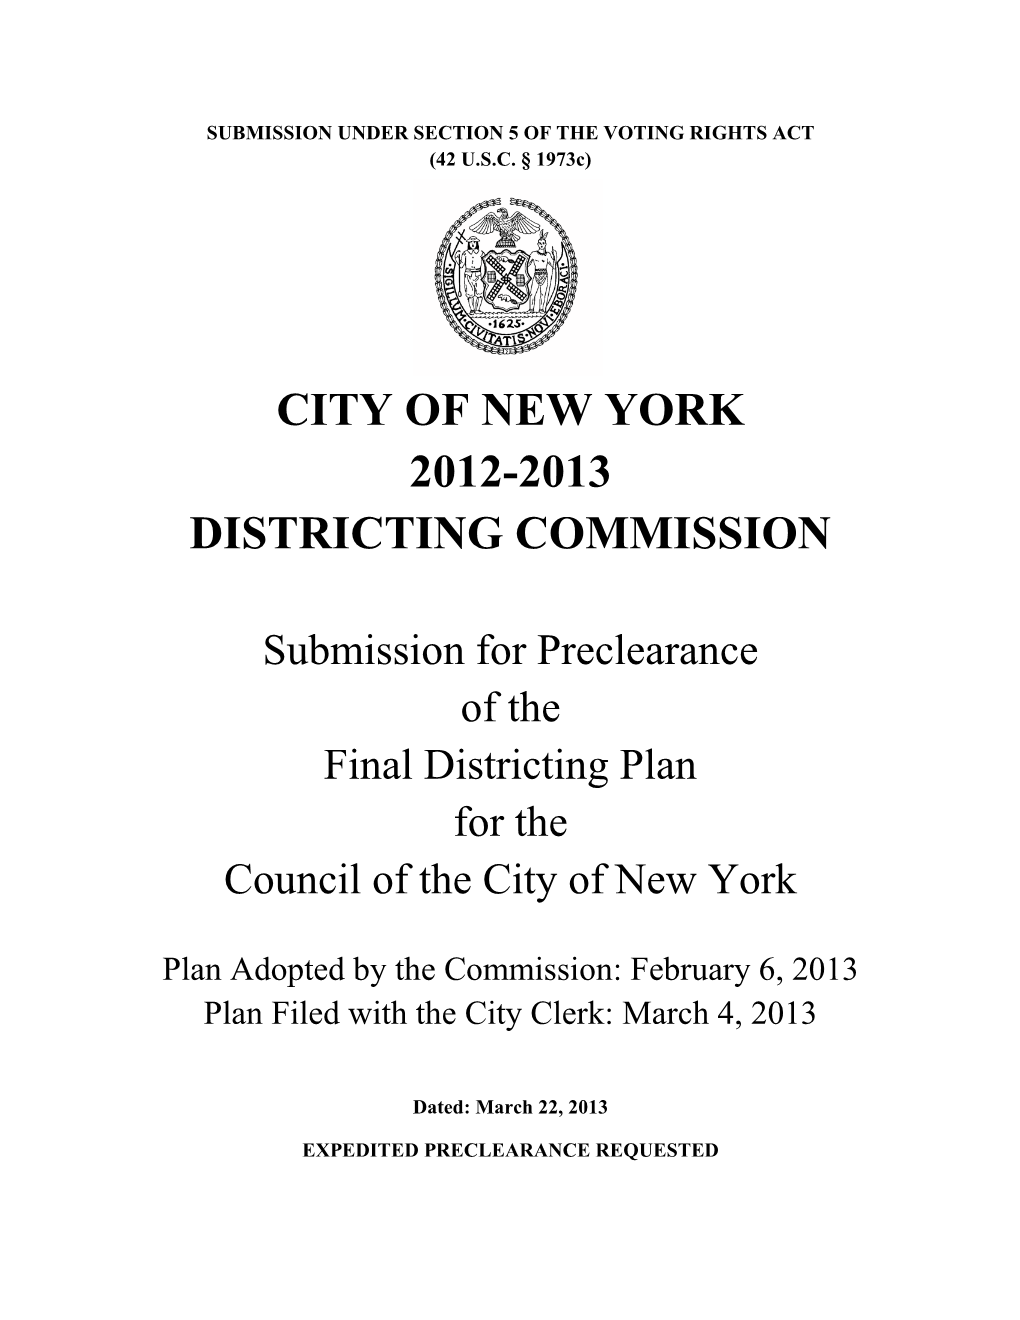 City of New York 2012-2013 Districting Commission